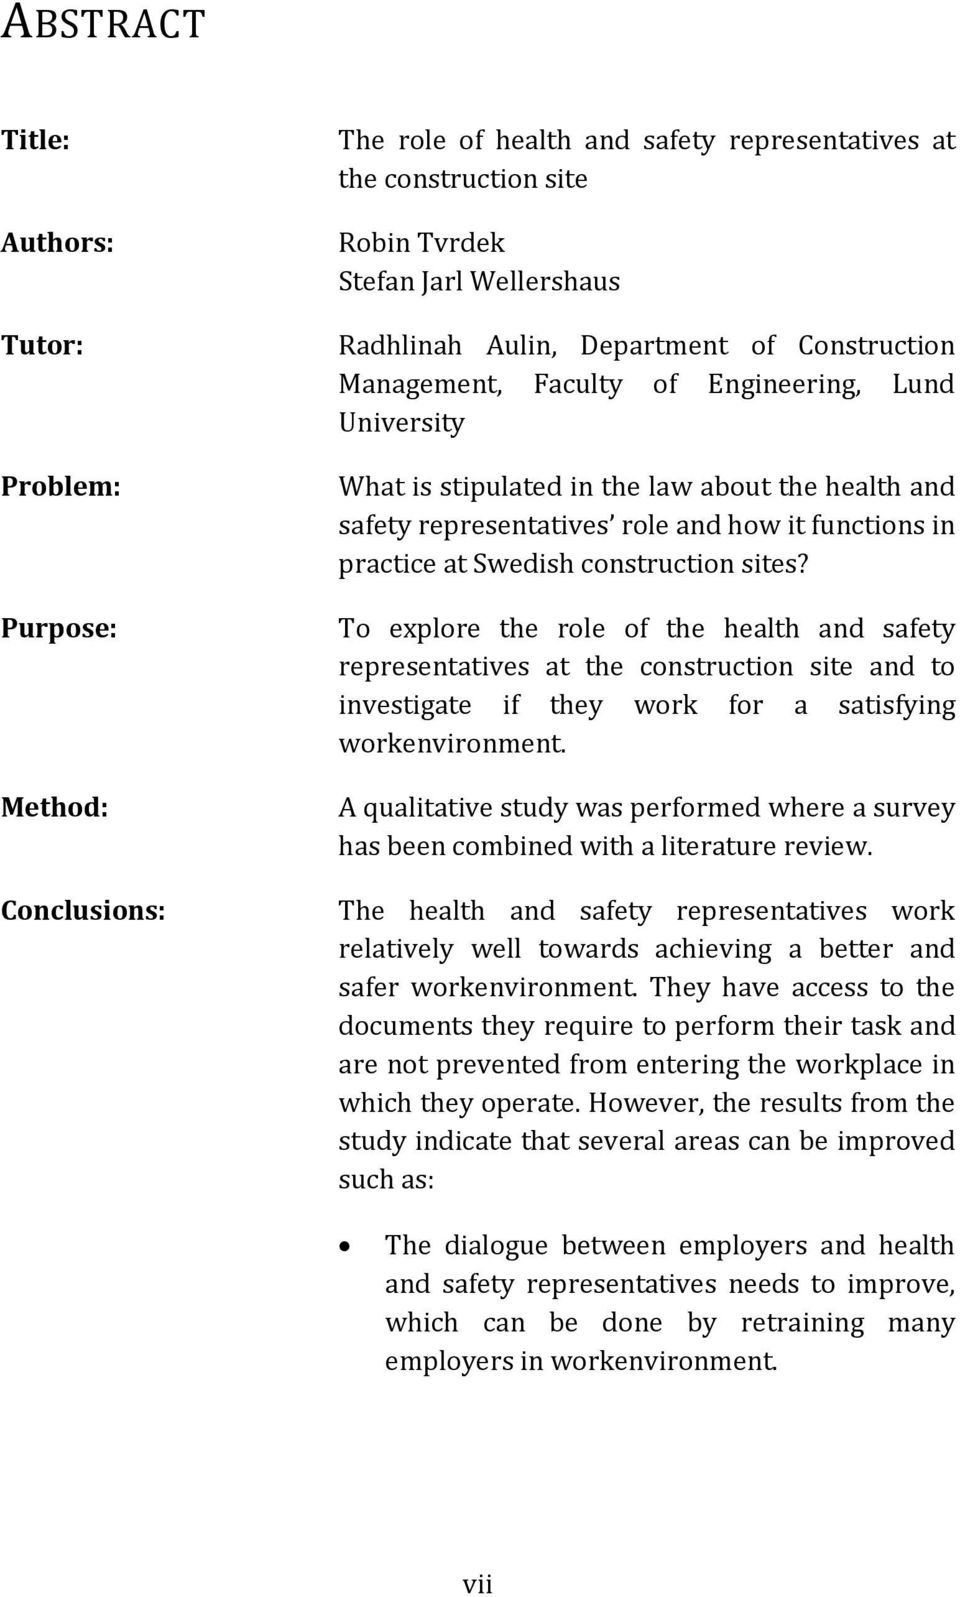 Swedish construction sites? To explore the role of the health and safety representatives at the construction site and to investigate if they work for a satisfying workenvironment.